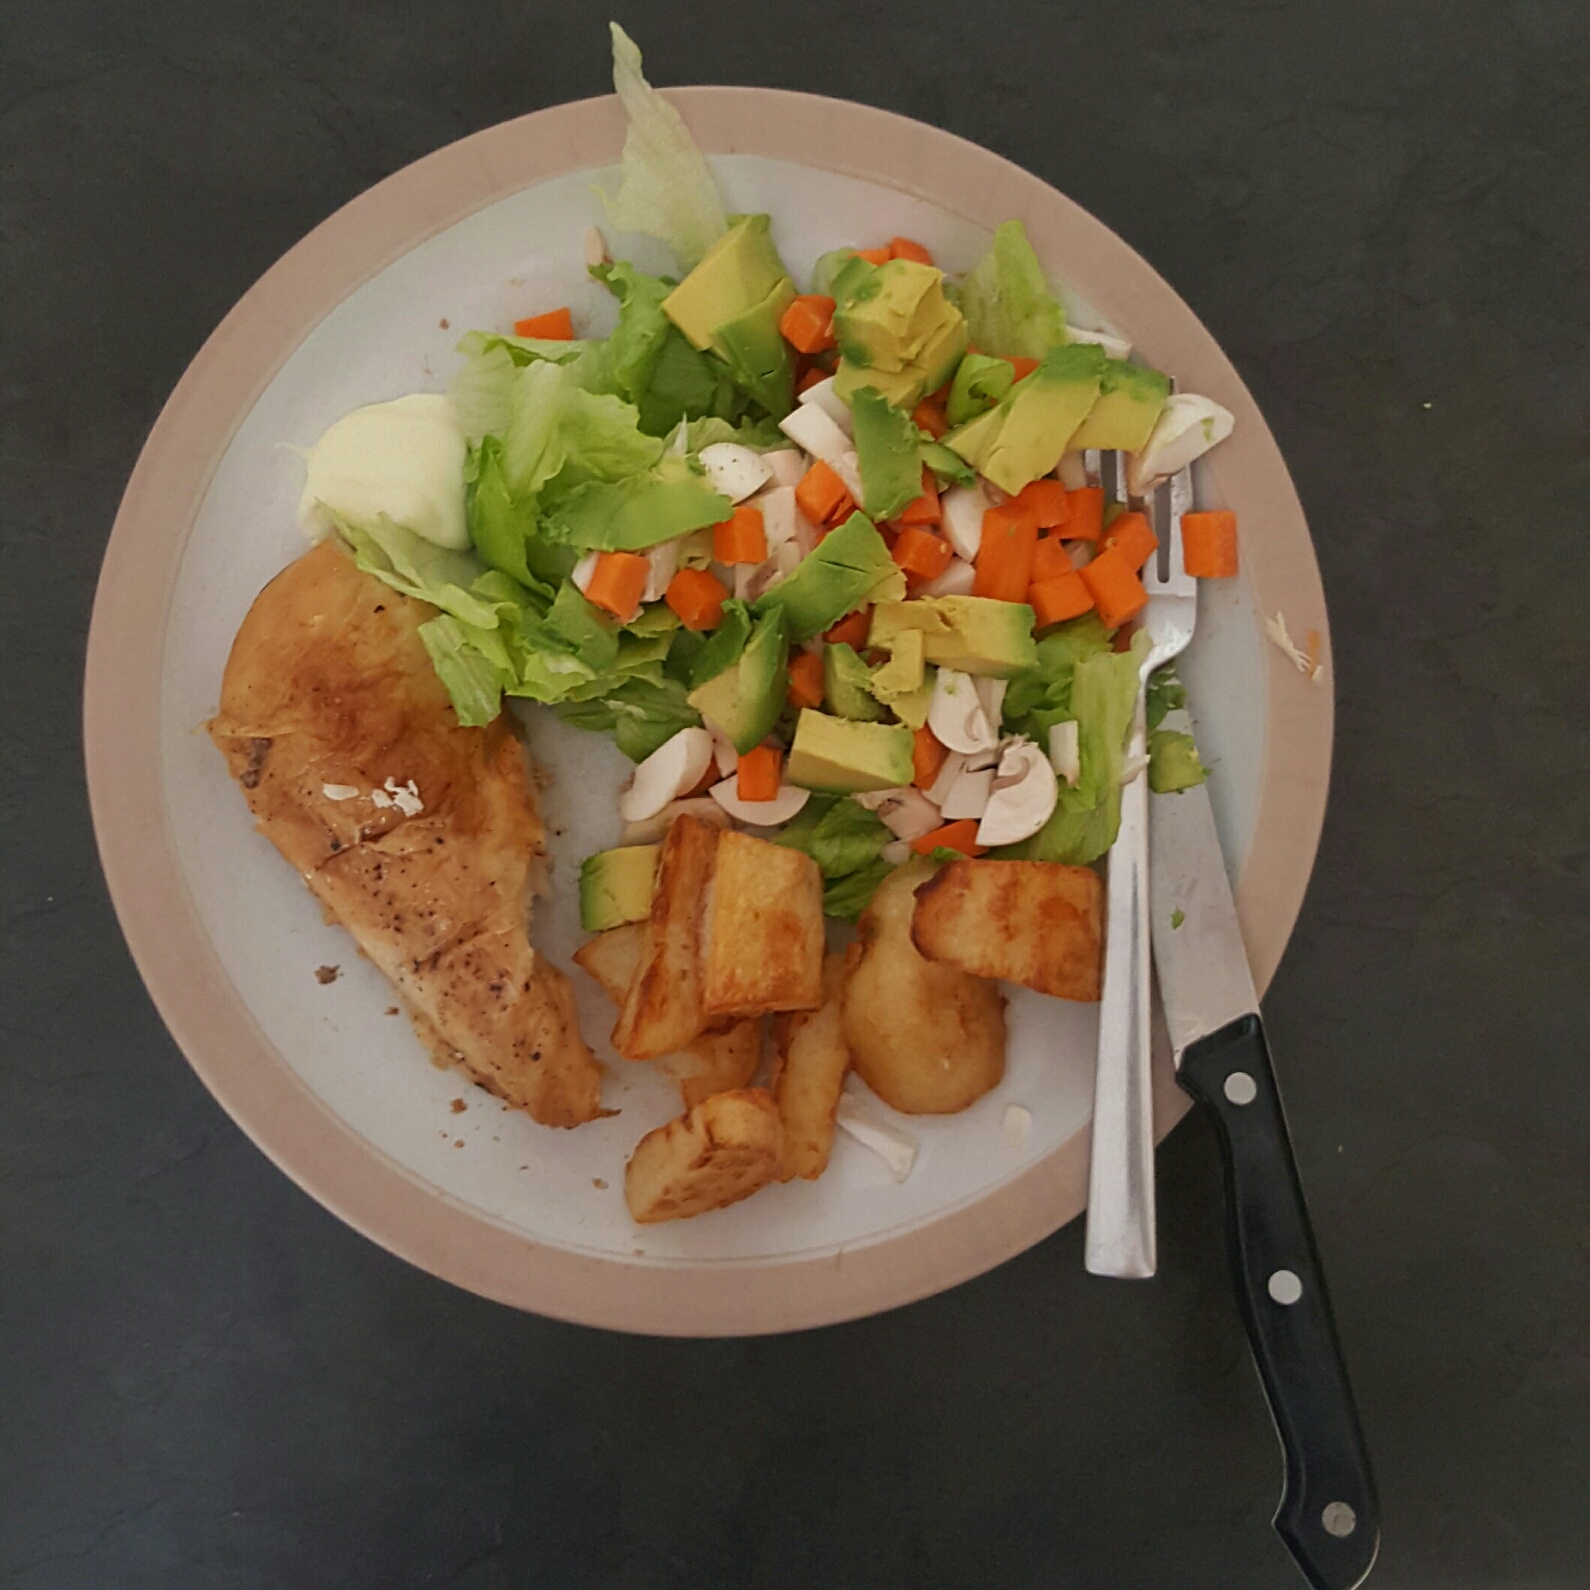 Grilled chicken with roast potatoes and carrot, mushroom, avo salad